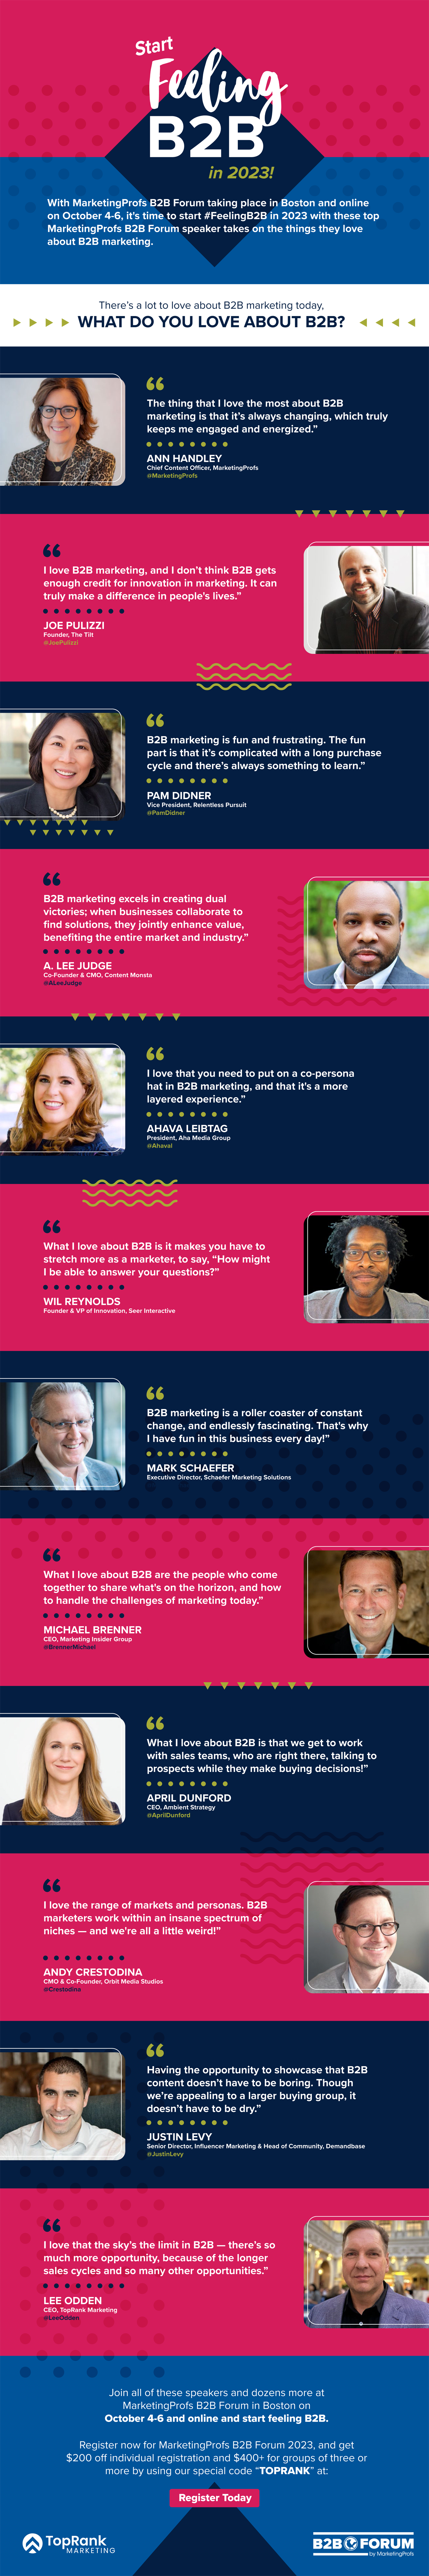 Feeling B2B Infographic: What Do 12 Top #MPB2B Speakers Love About B2B Marketing?